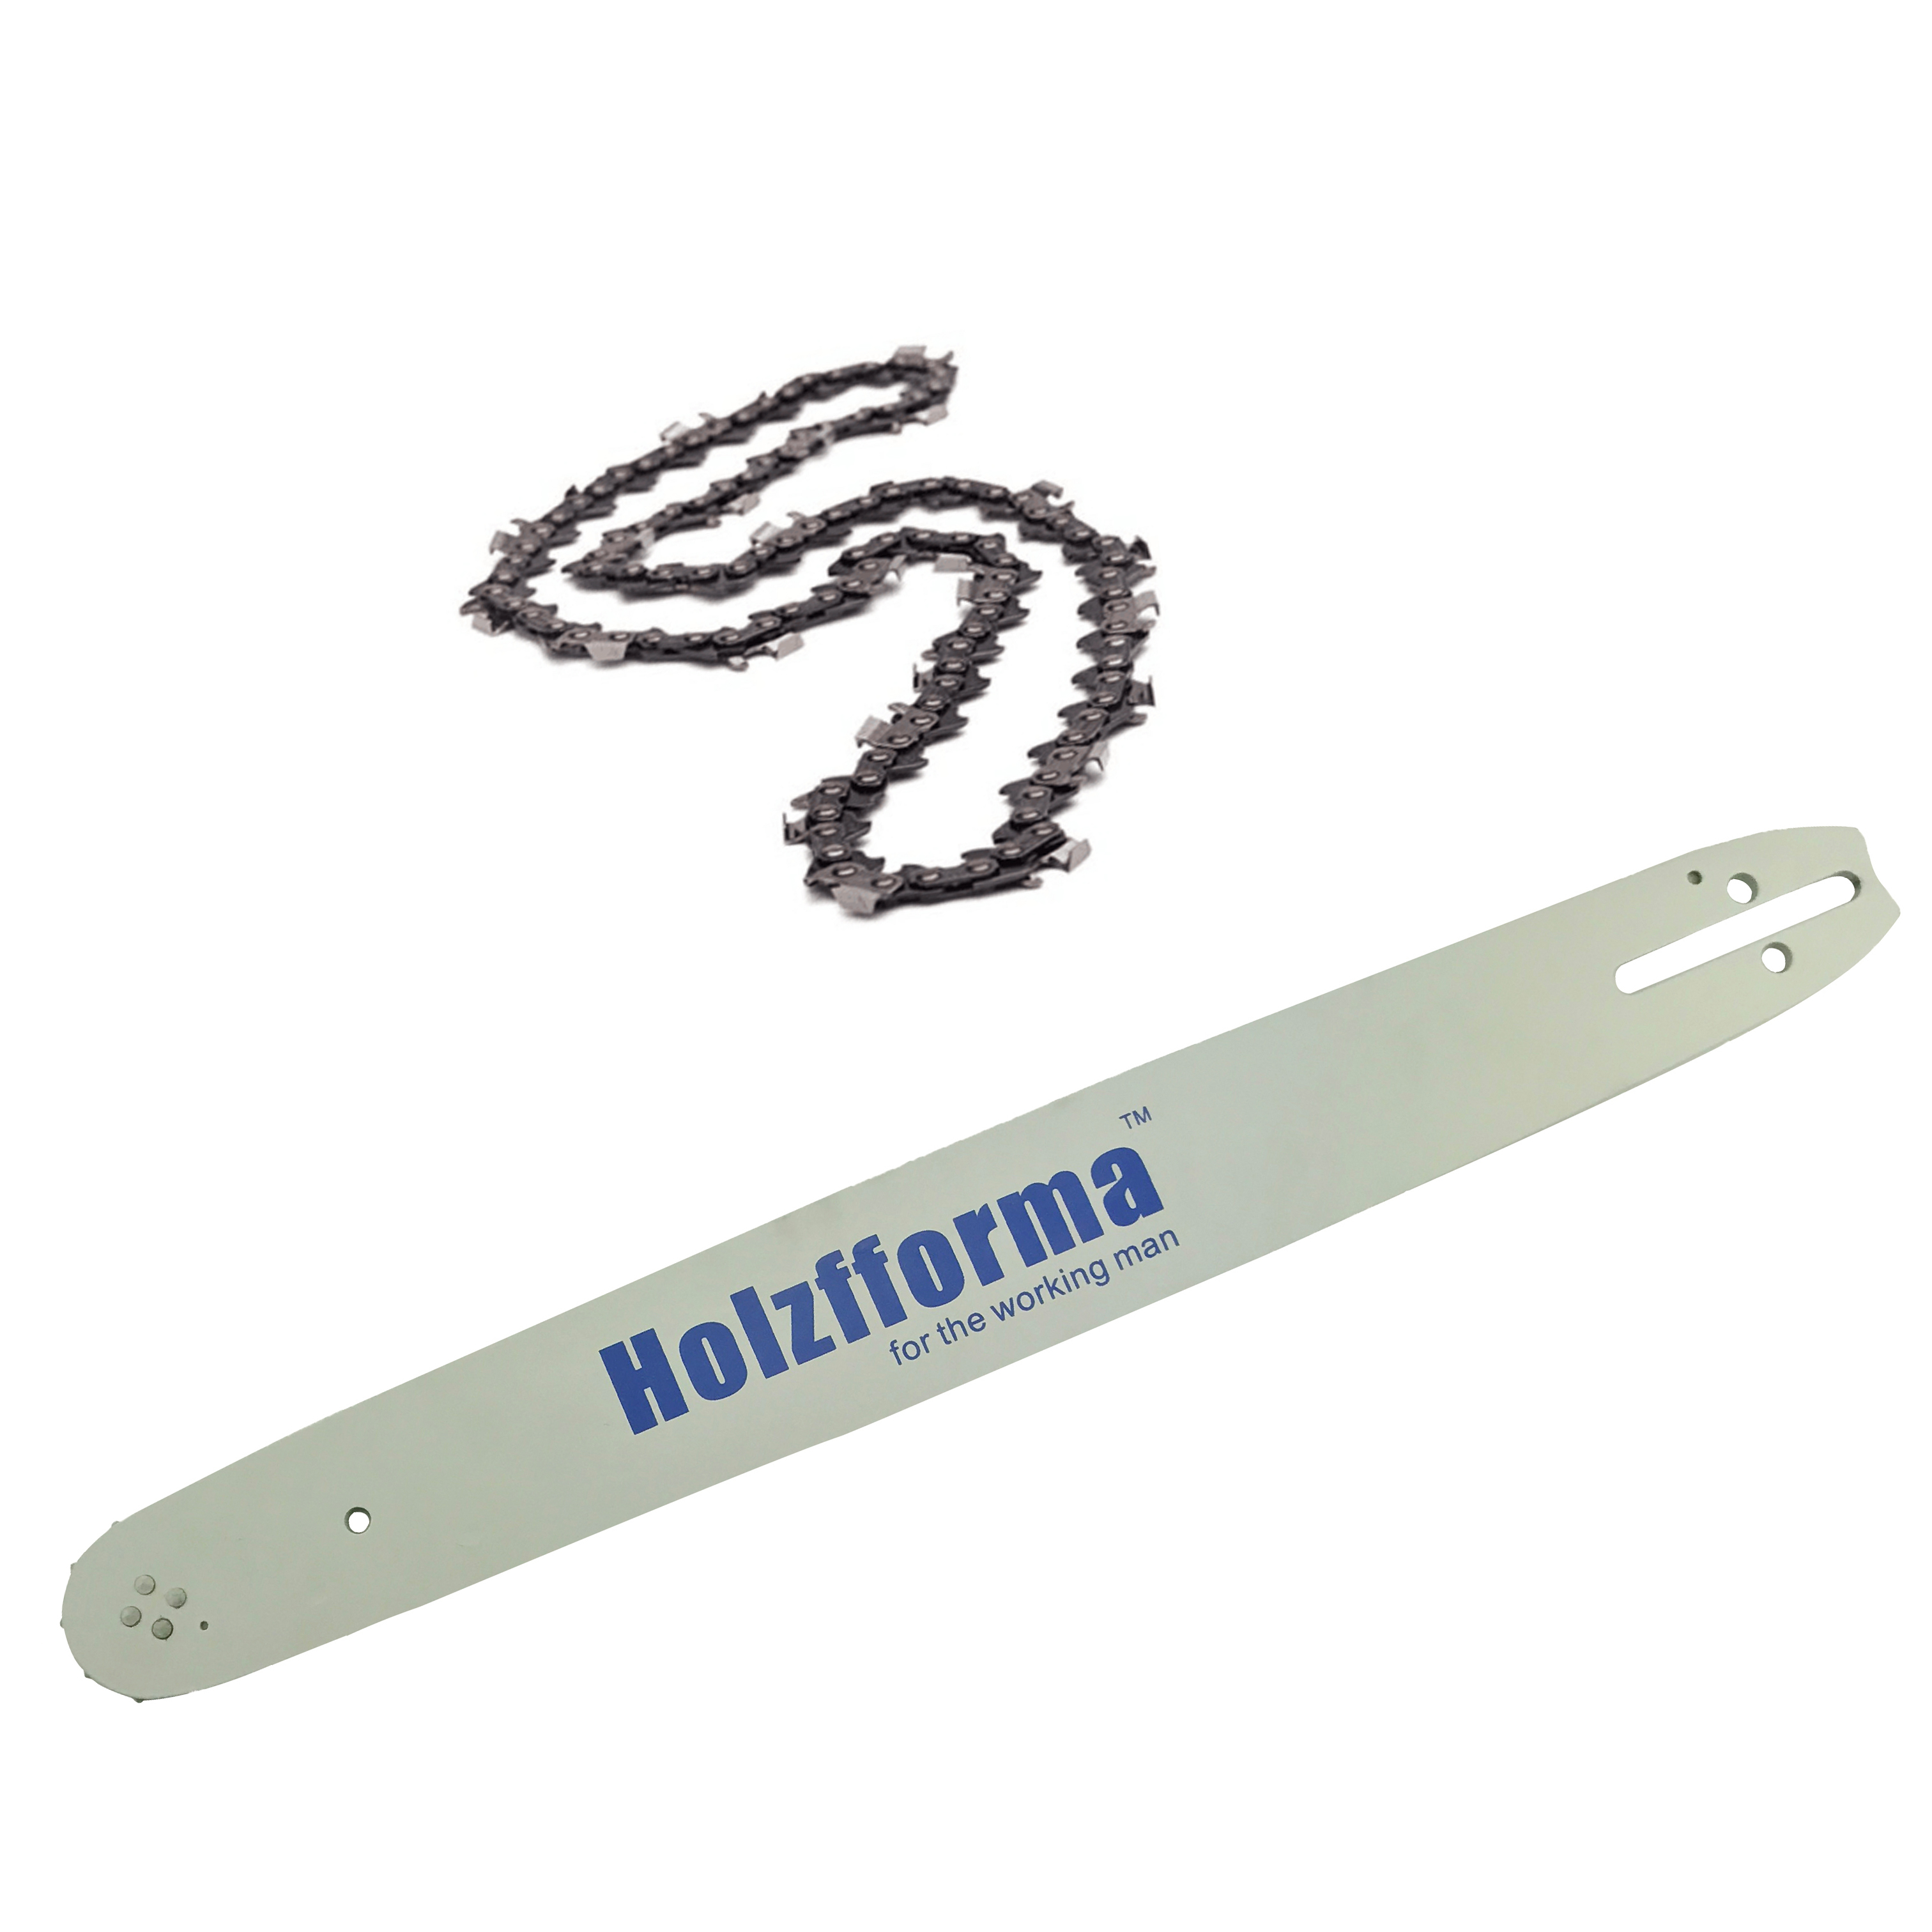 Holzfforma® 20Inch Guide Bar &Saw Chain Combo .325 .063 81DL For Stihl MS260 MS261 MS270 MS271 MS280 MS290 MS311 MS360 024 026 028 029 030 031 034 036 039